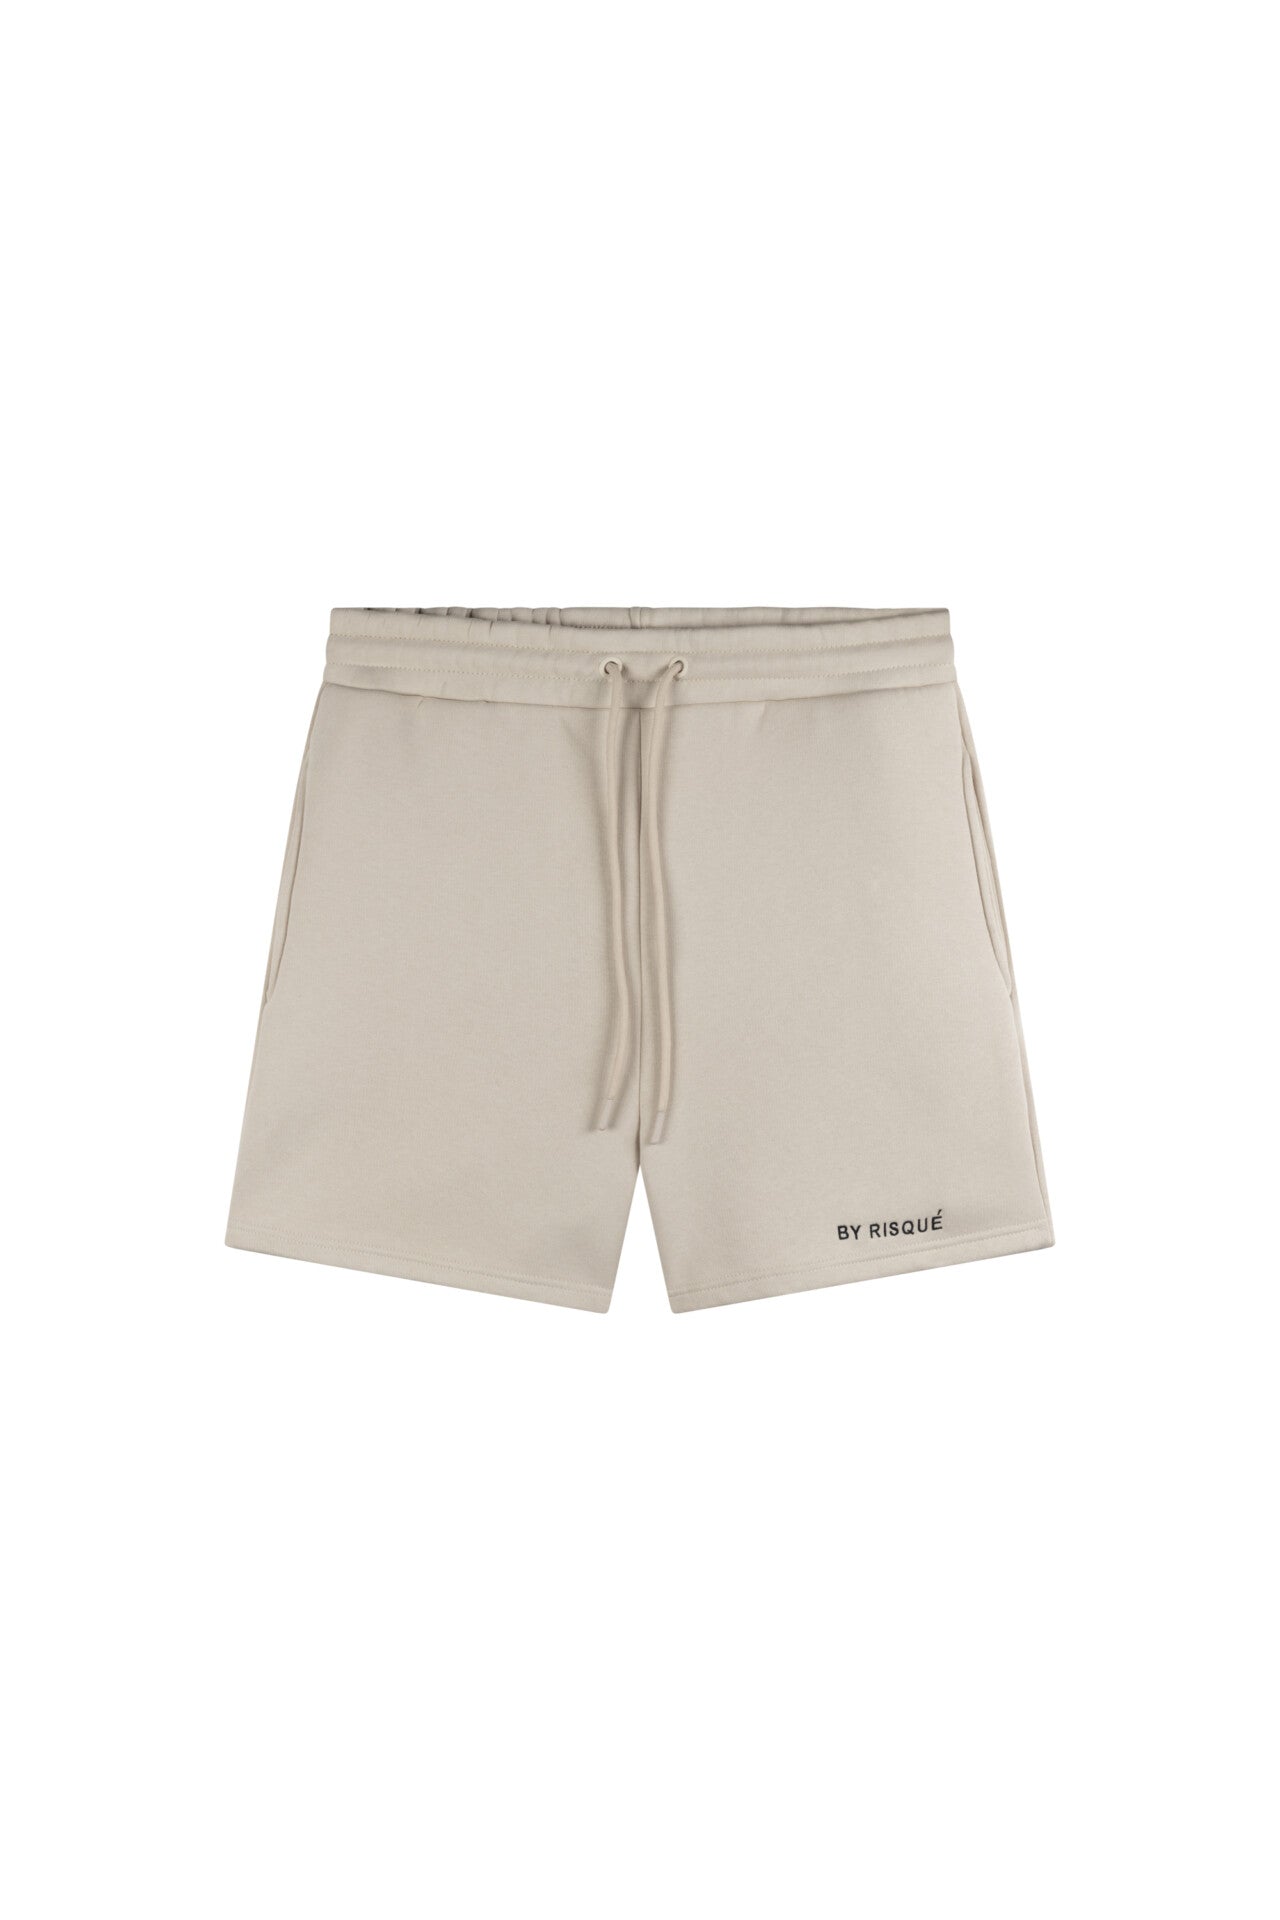 BY RISQUÉ Summer Sand Shorts